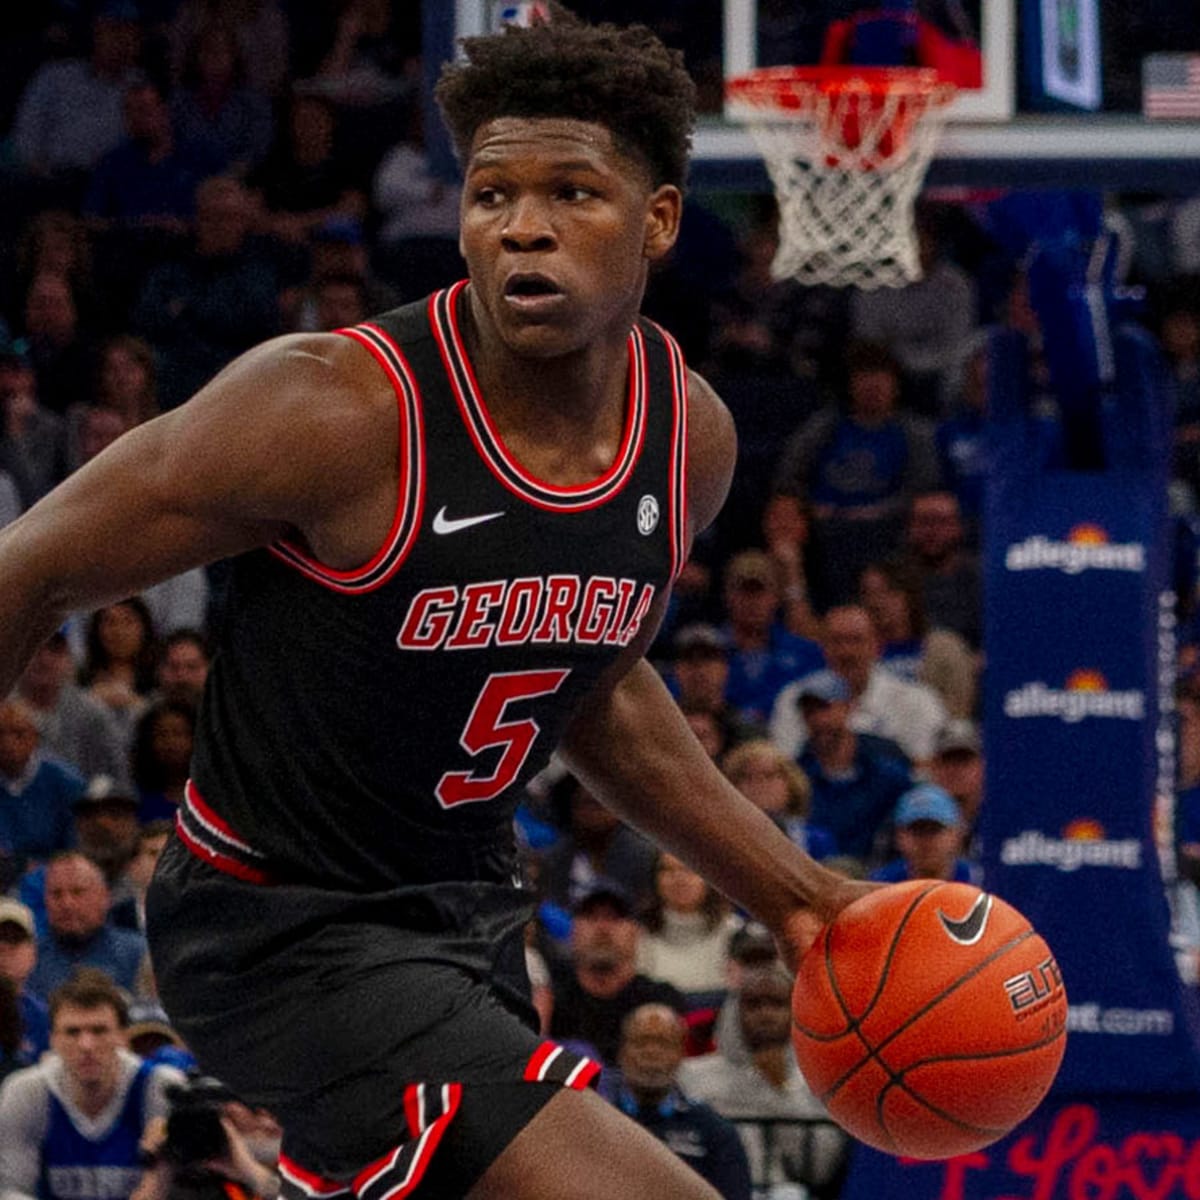 A fear of flying won't stop Isaiah Stewart's dad from showing support